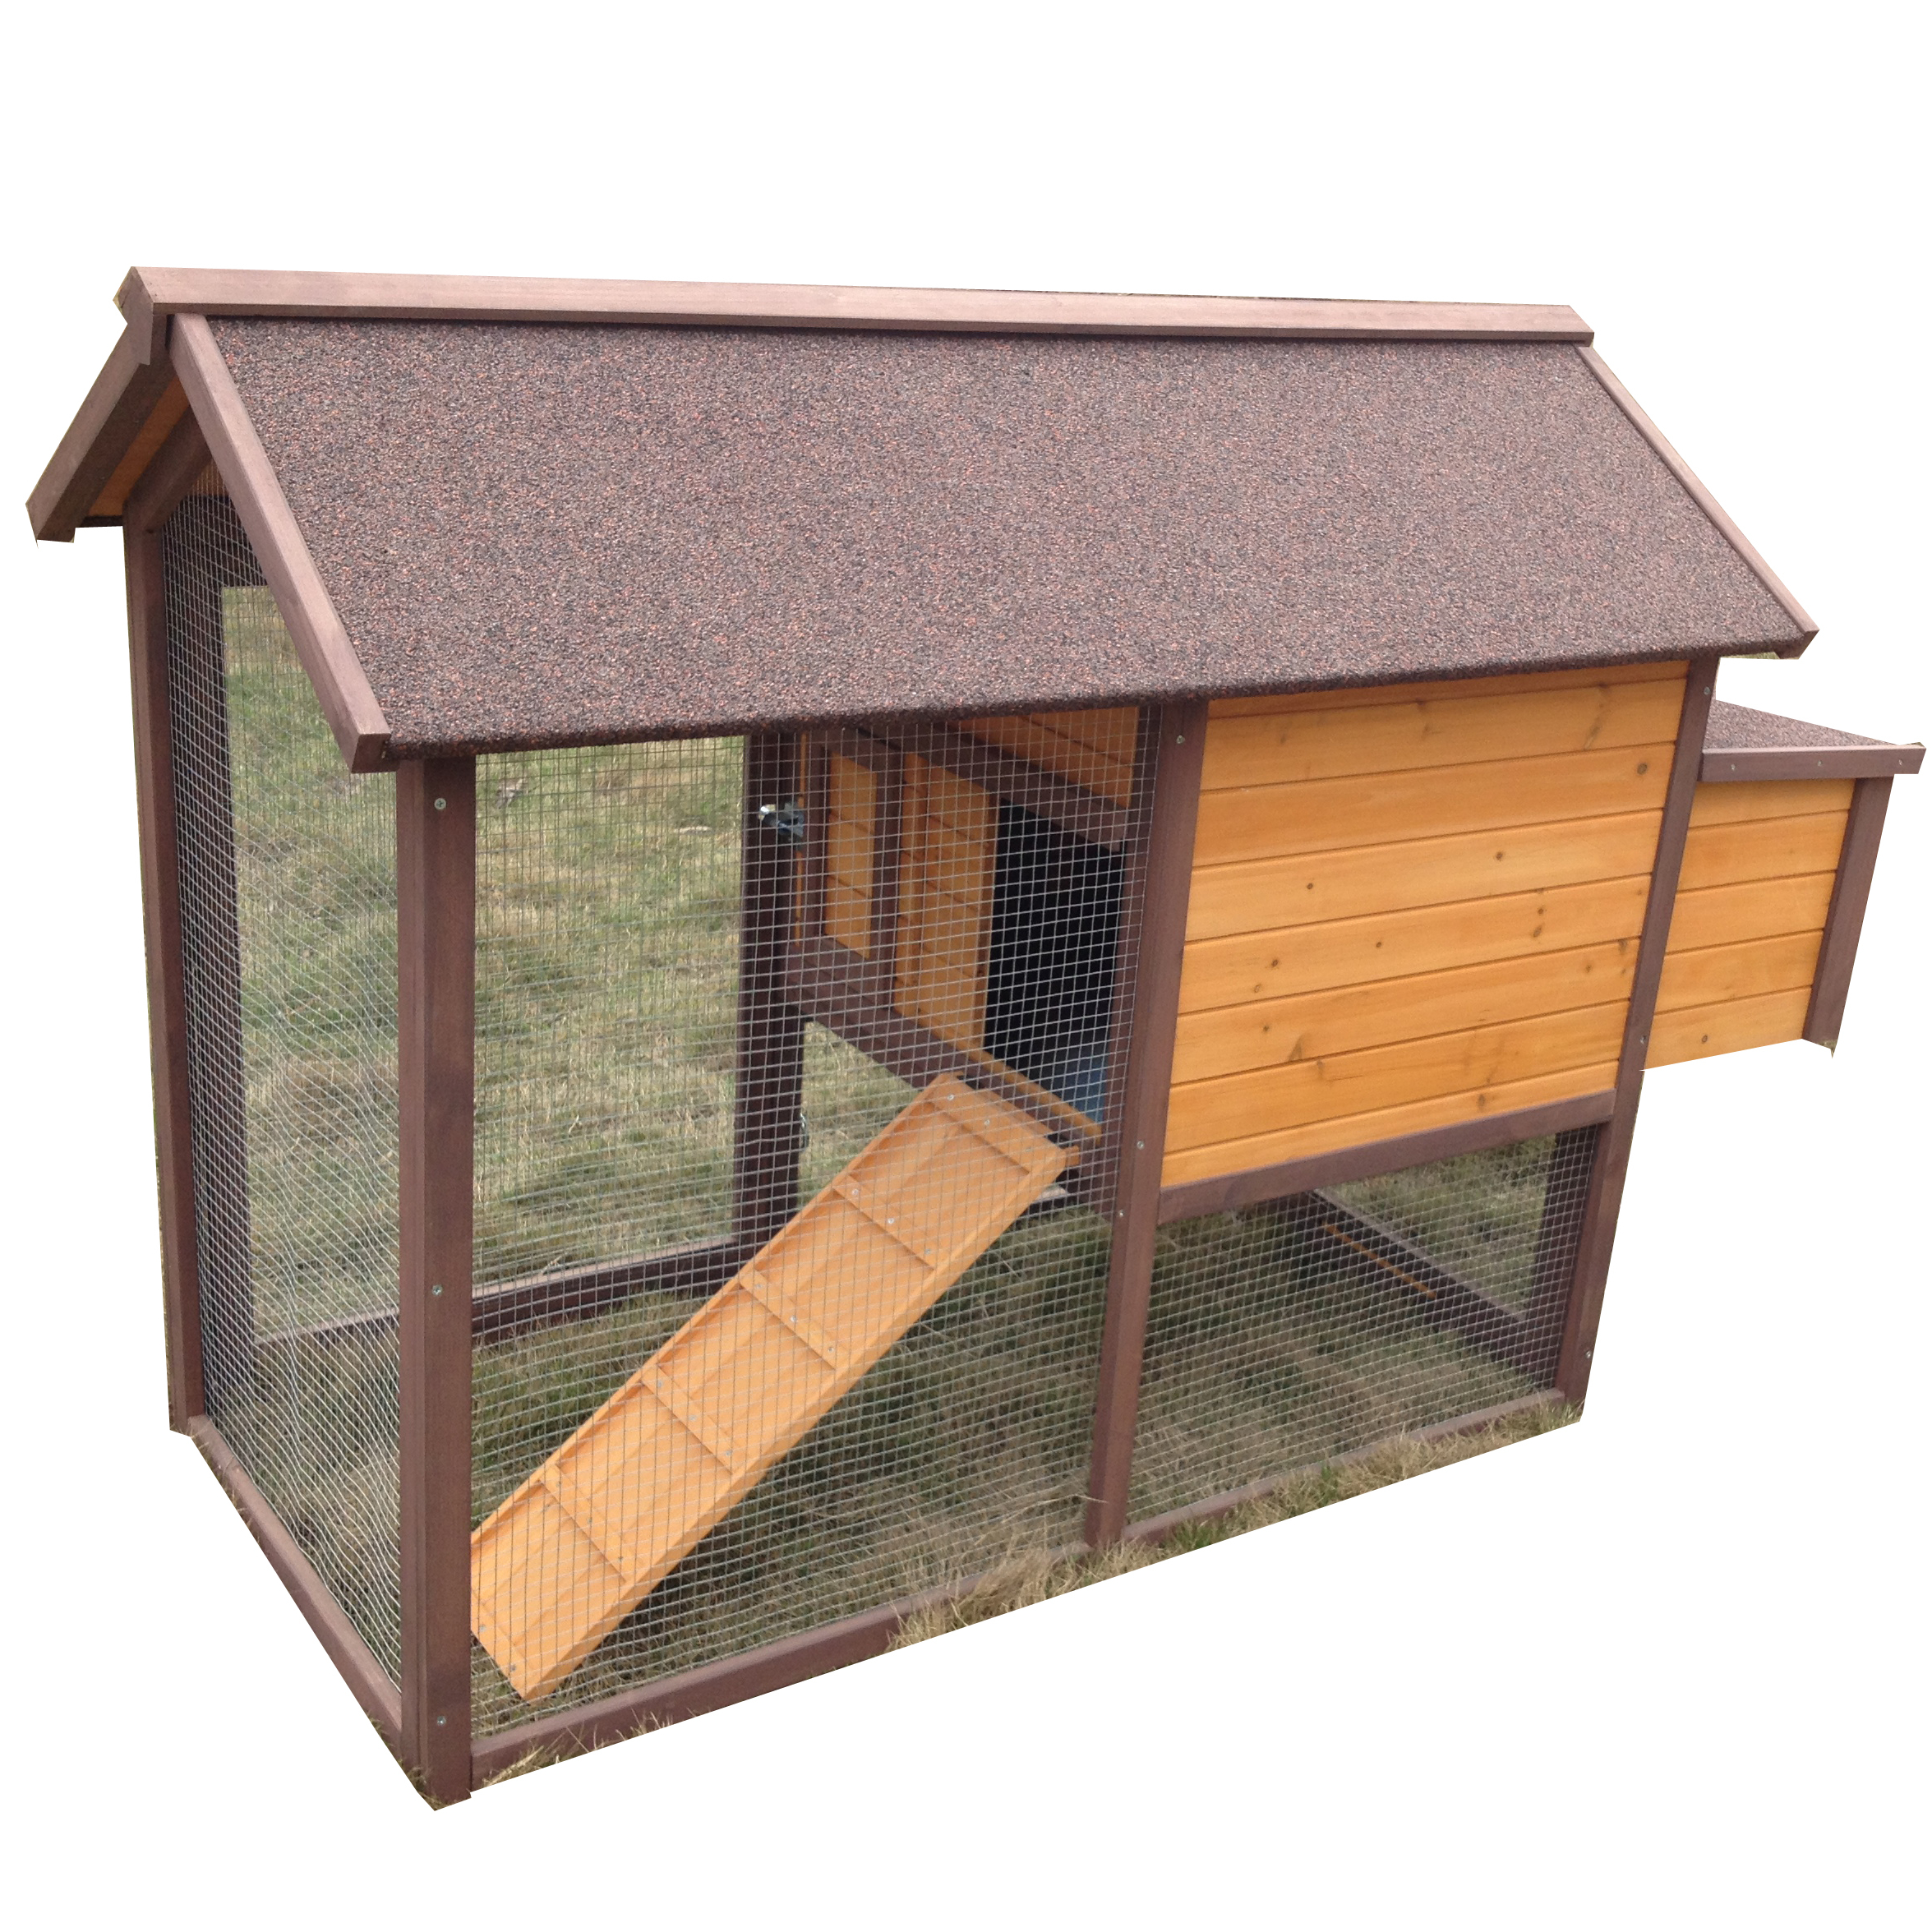 Poultry Farm Small Backyard Urban Hot sale wooden pet house with run cage nesting box Chicken Coop